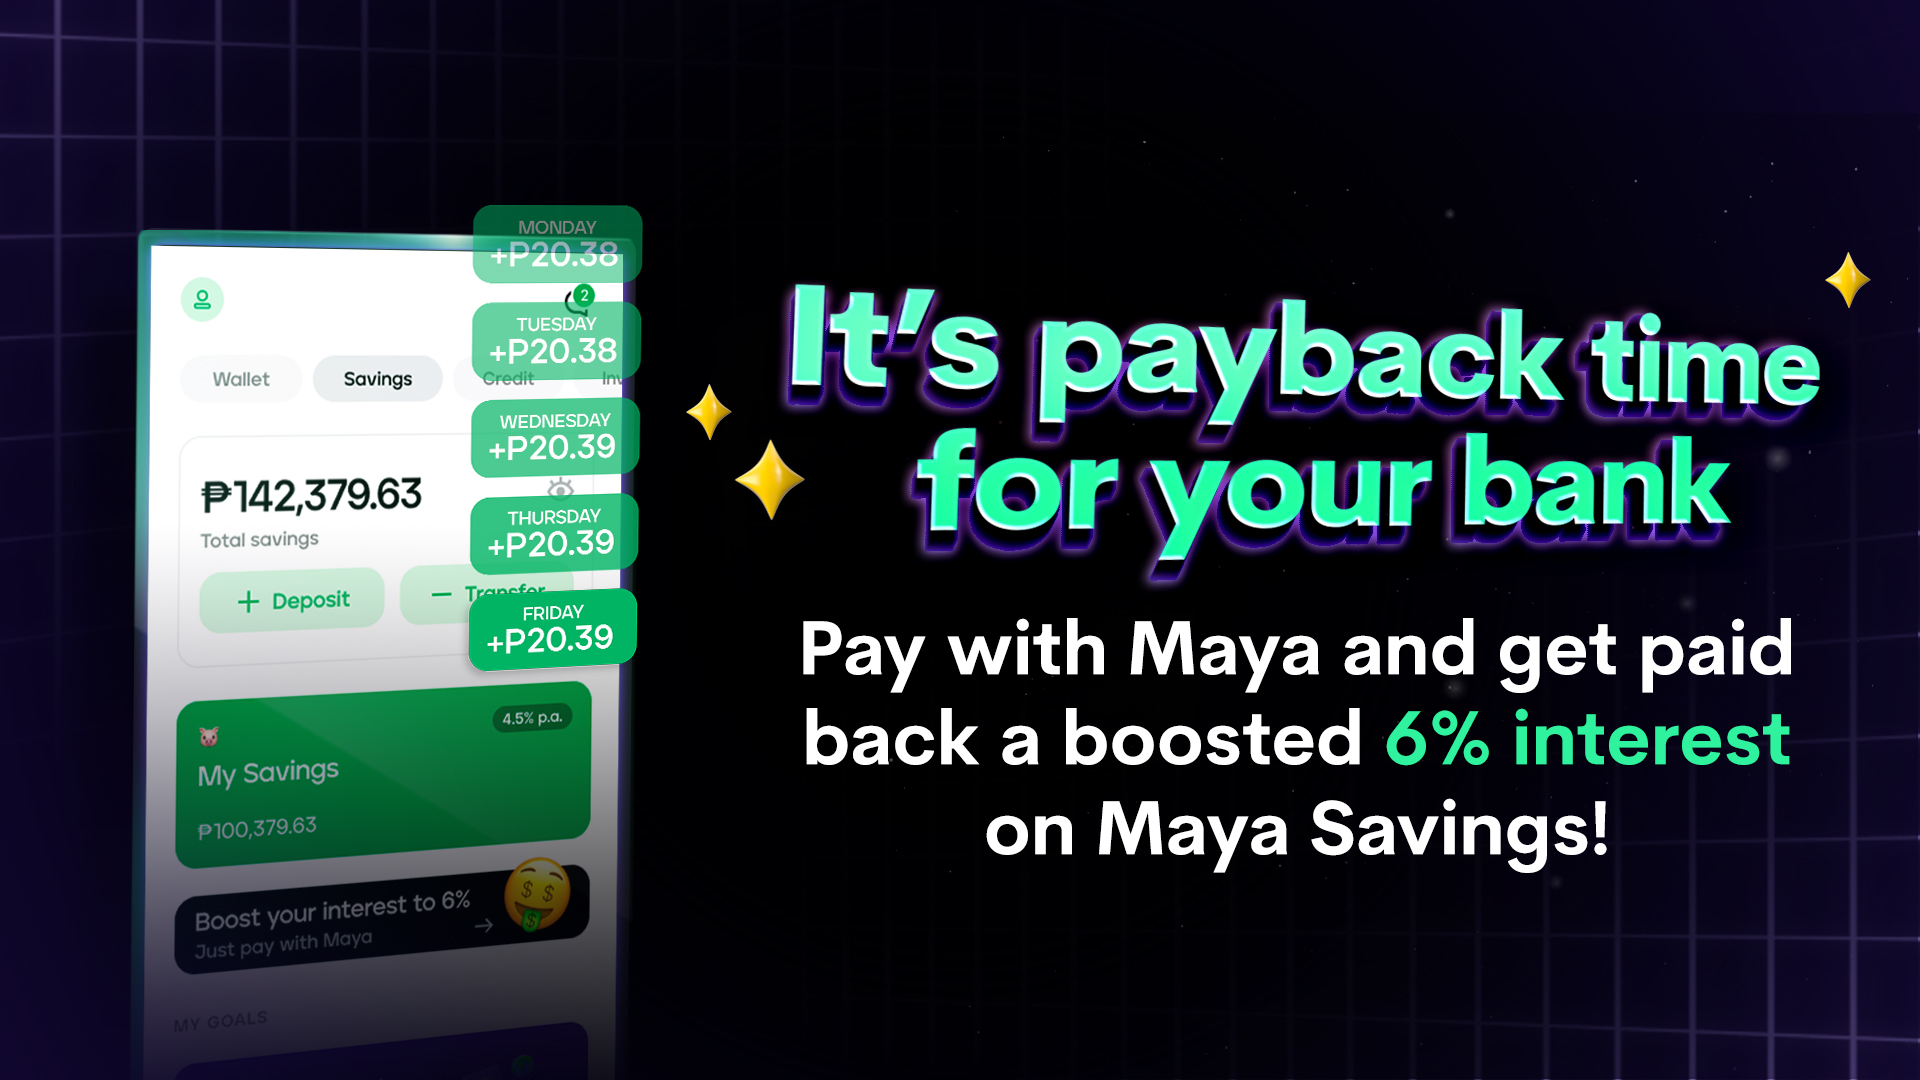 Boost your interest to 6% with Maya Savings when you pay with Maya